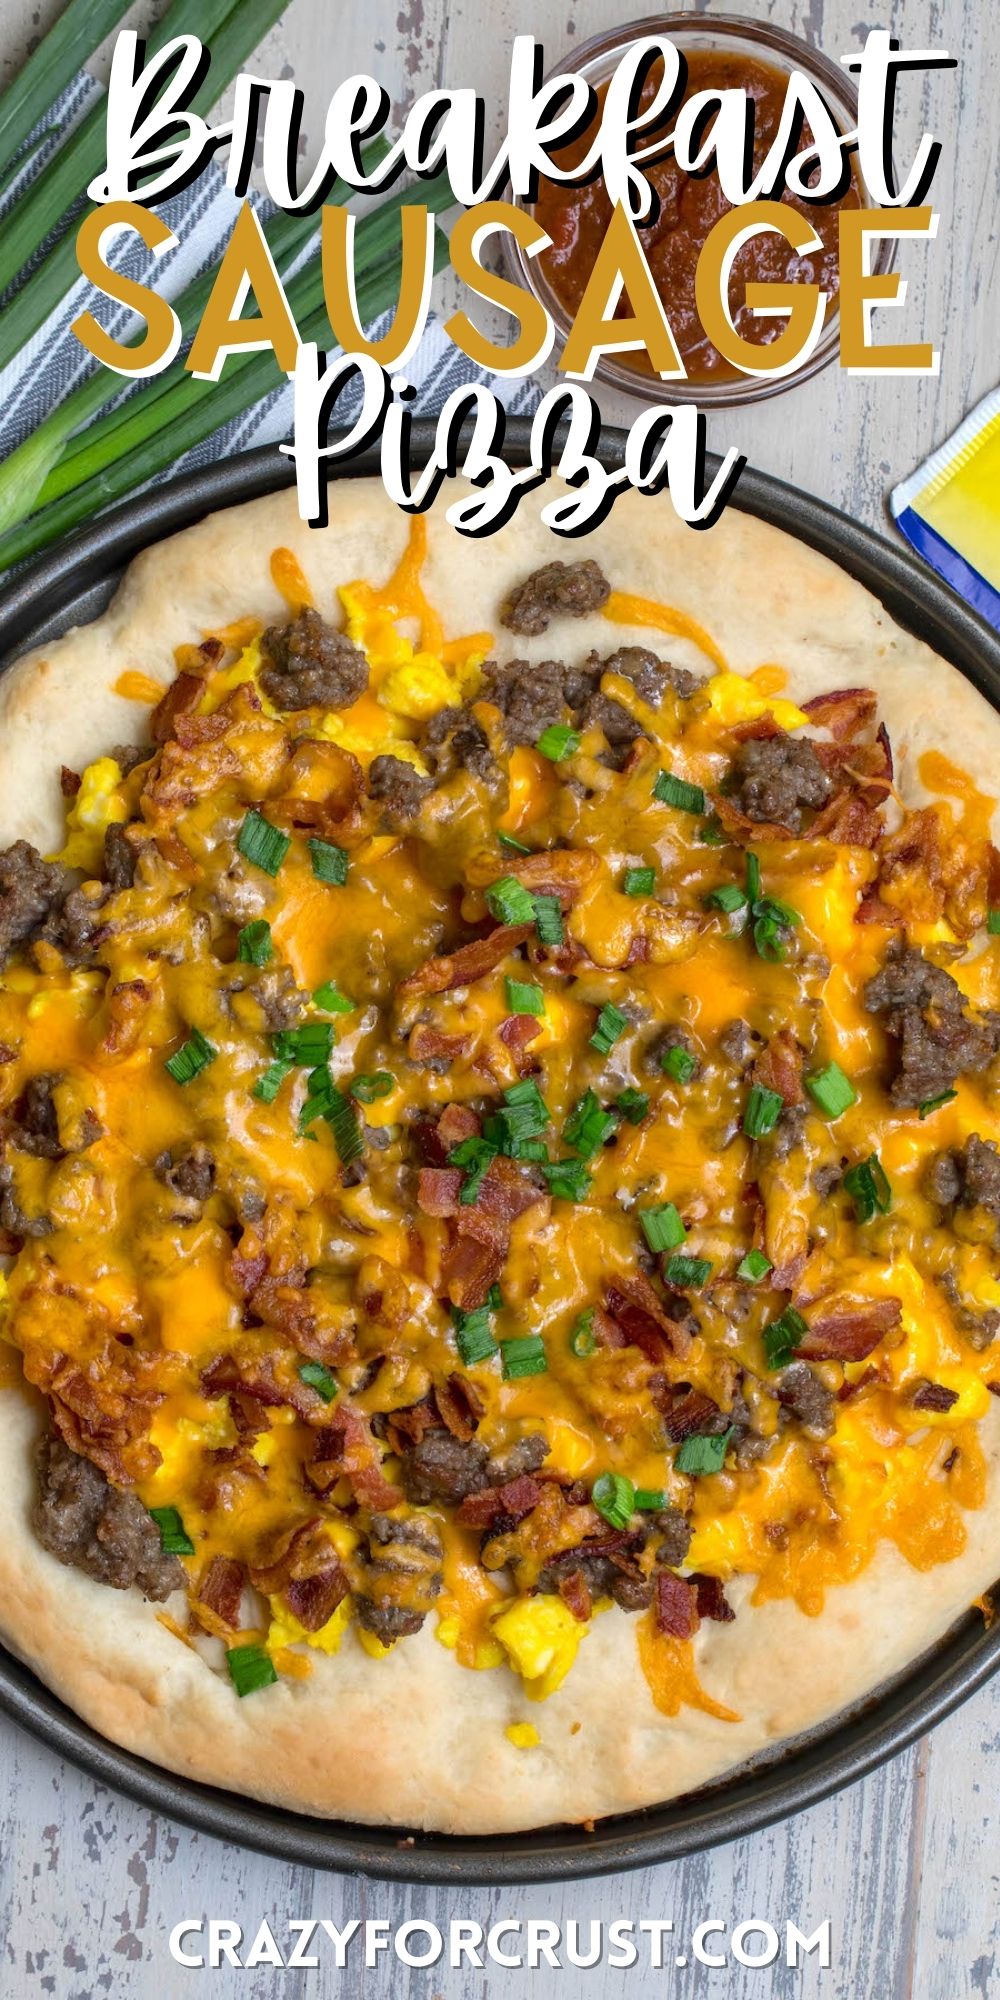 pizza with cheese and sausage on top with words on the image